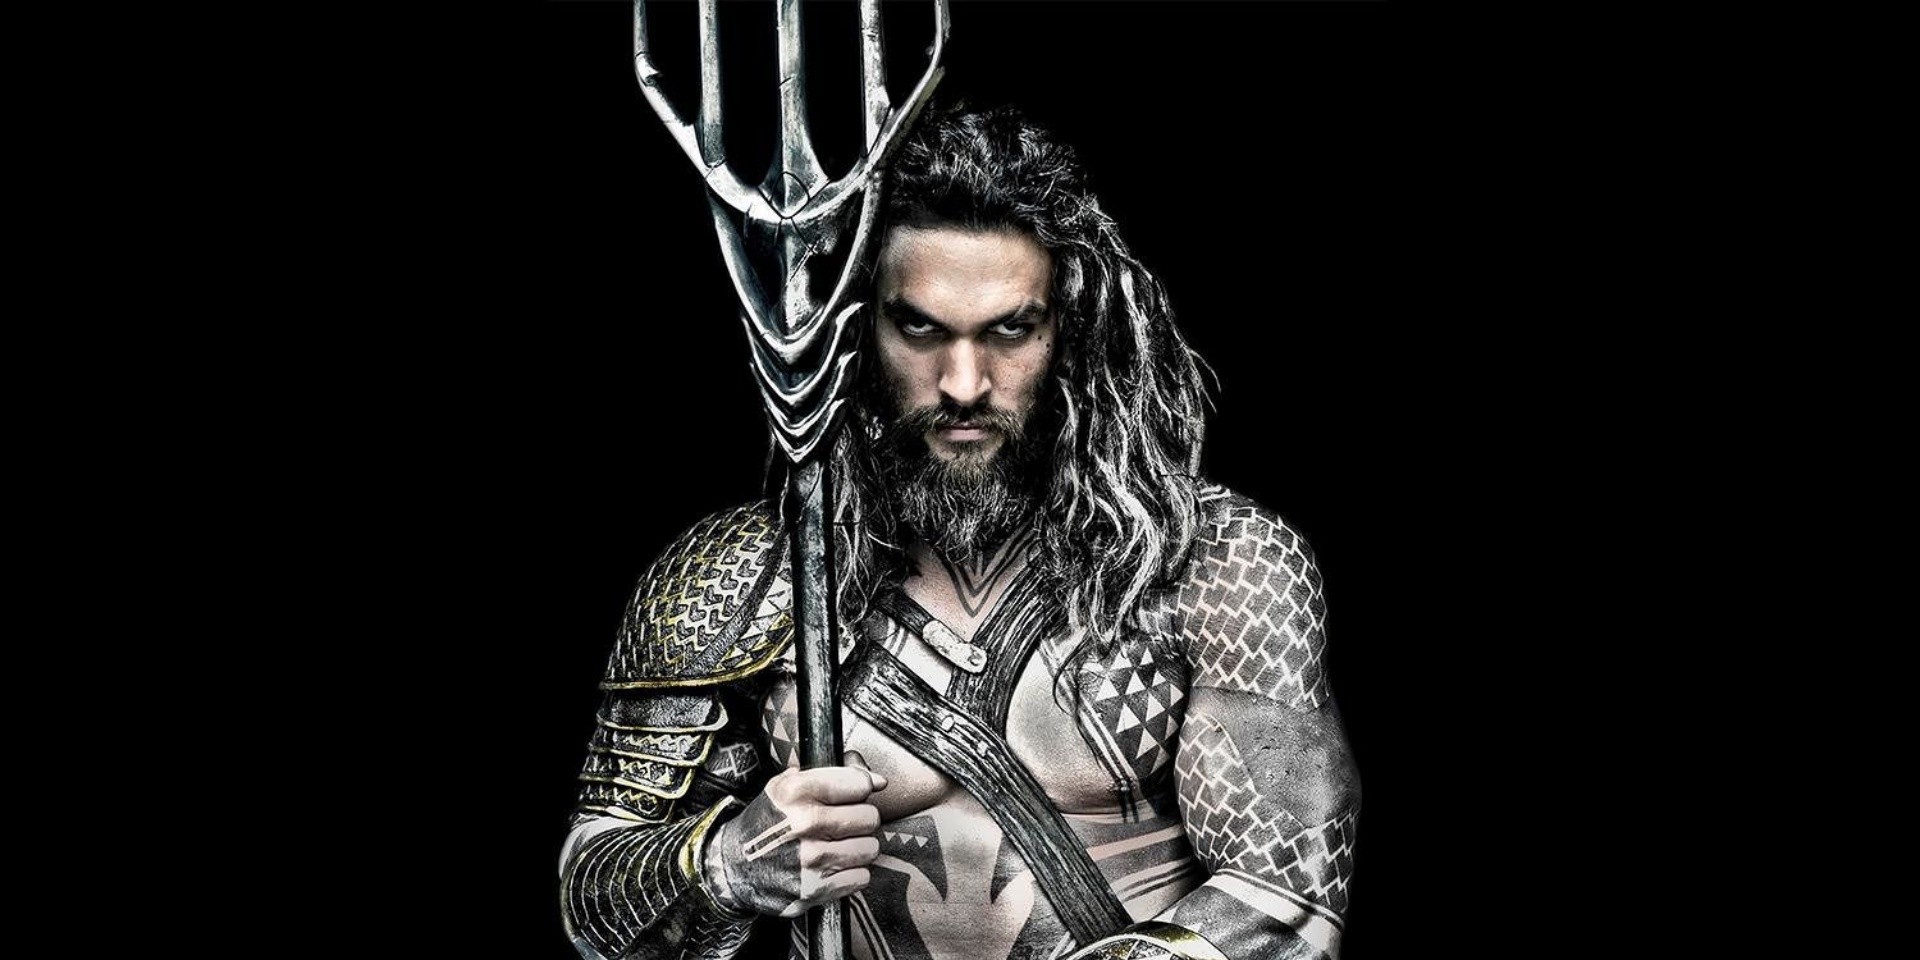 Jason Momoa reveals that his role in Aquaman was inspired by Tool and Metallica